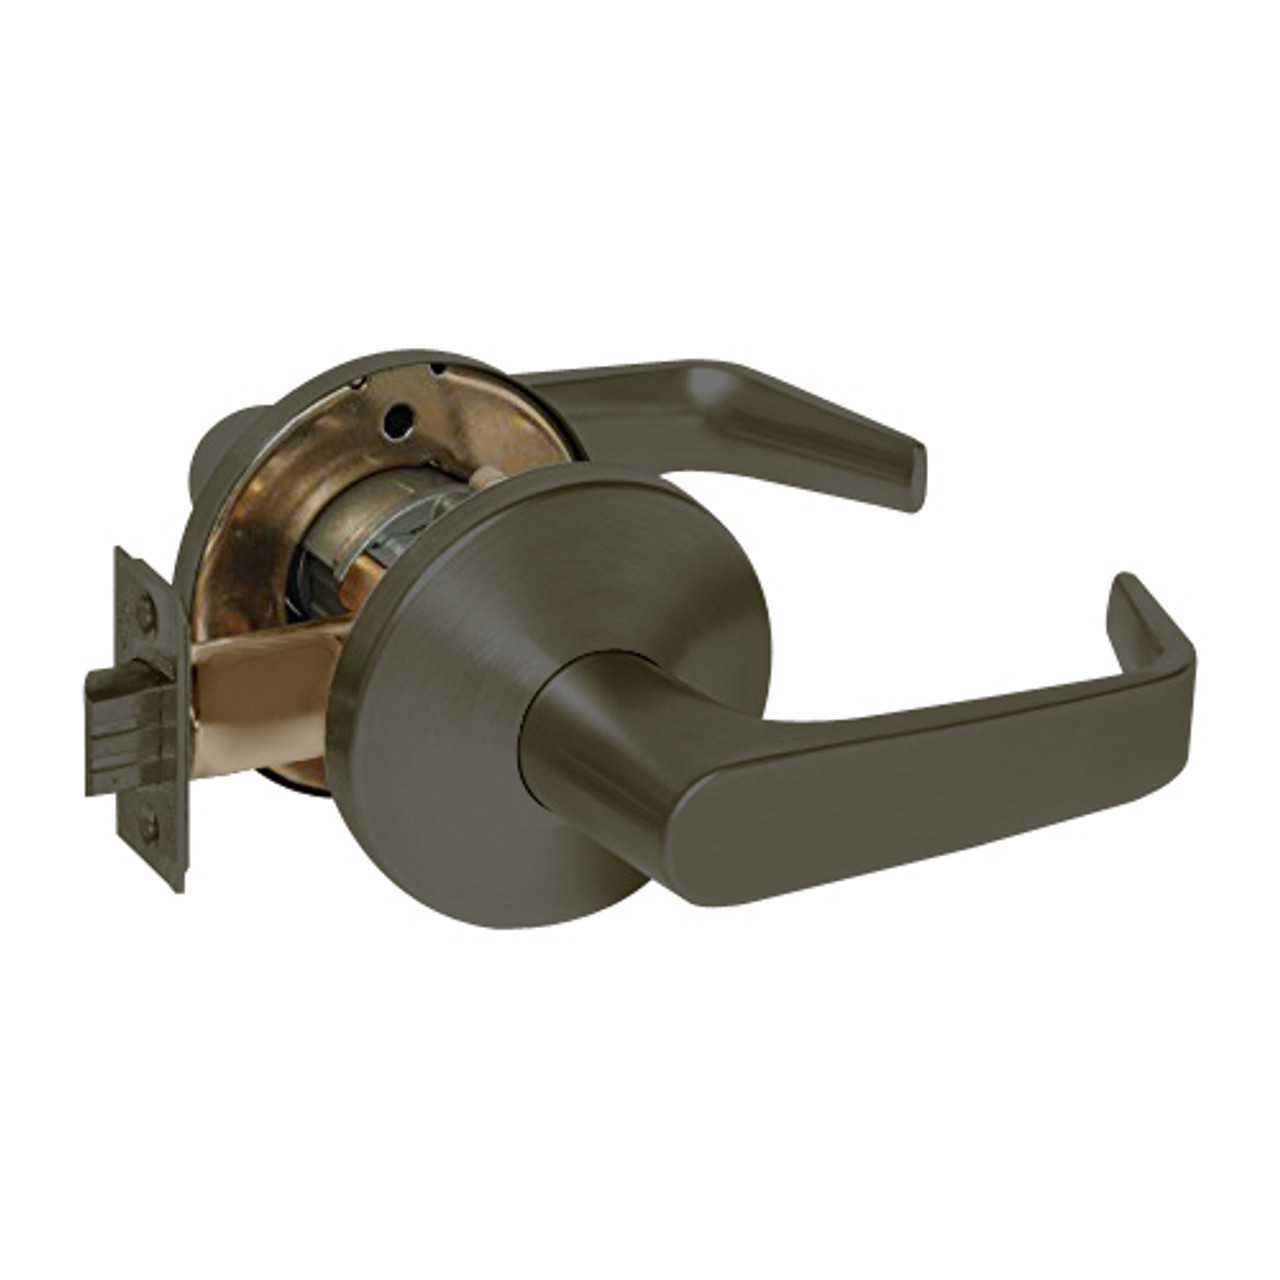 9K30NX15LS3613LM Best 9K Series Passage Heavy Duty Cylindrical Lever Locks with Contour Angle with Return Lever Design in Oil Rubbed Bronze